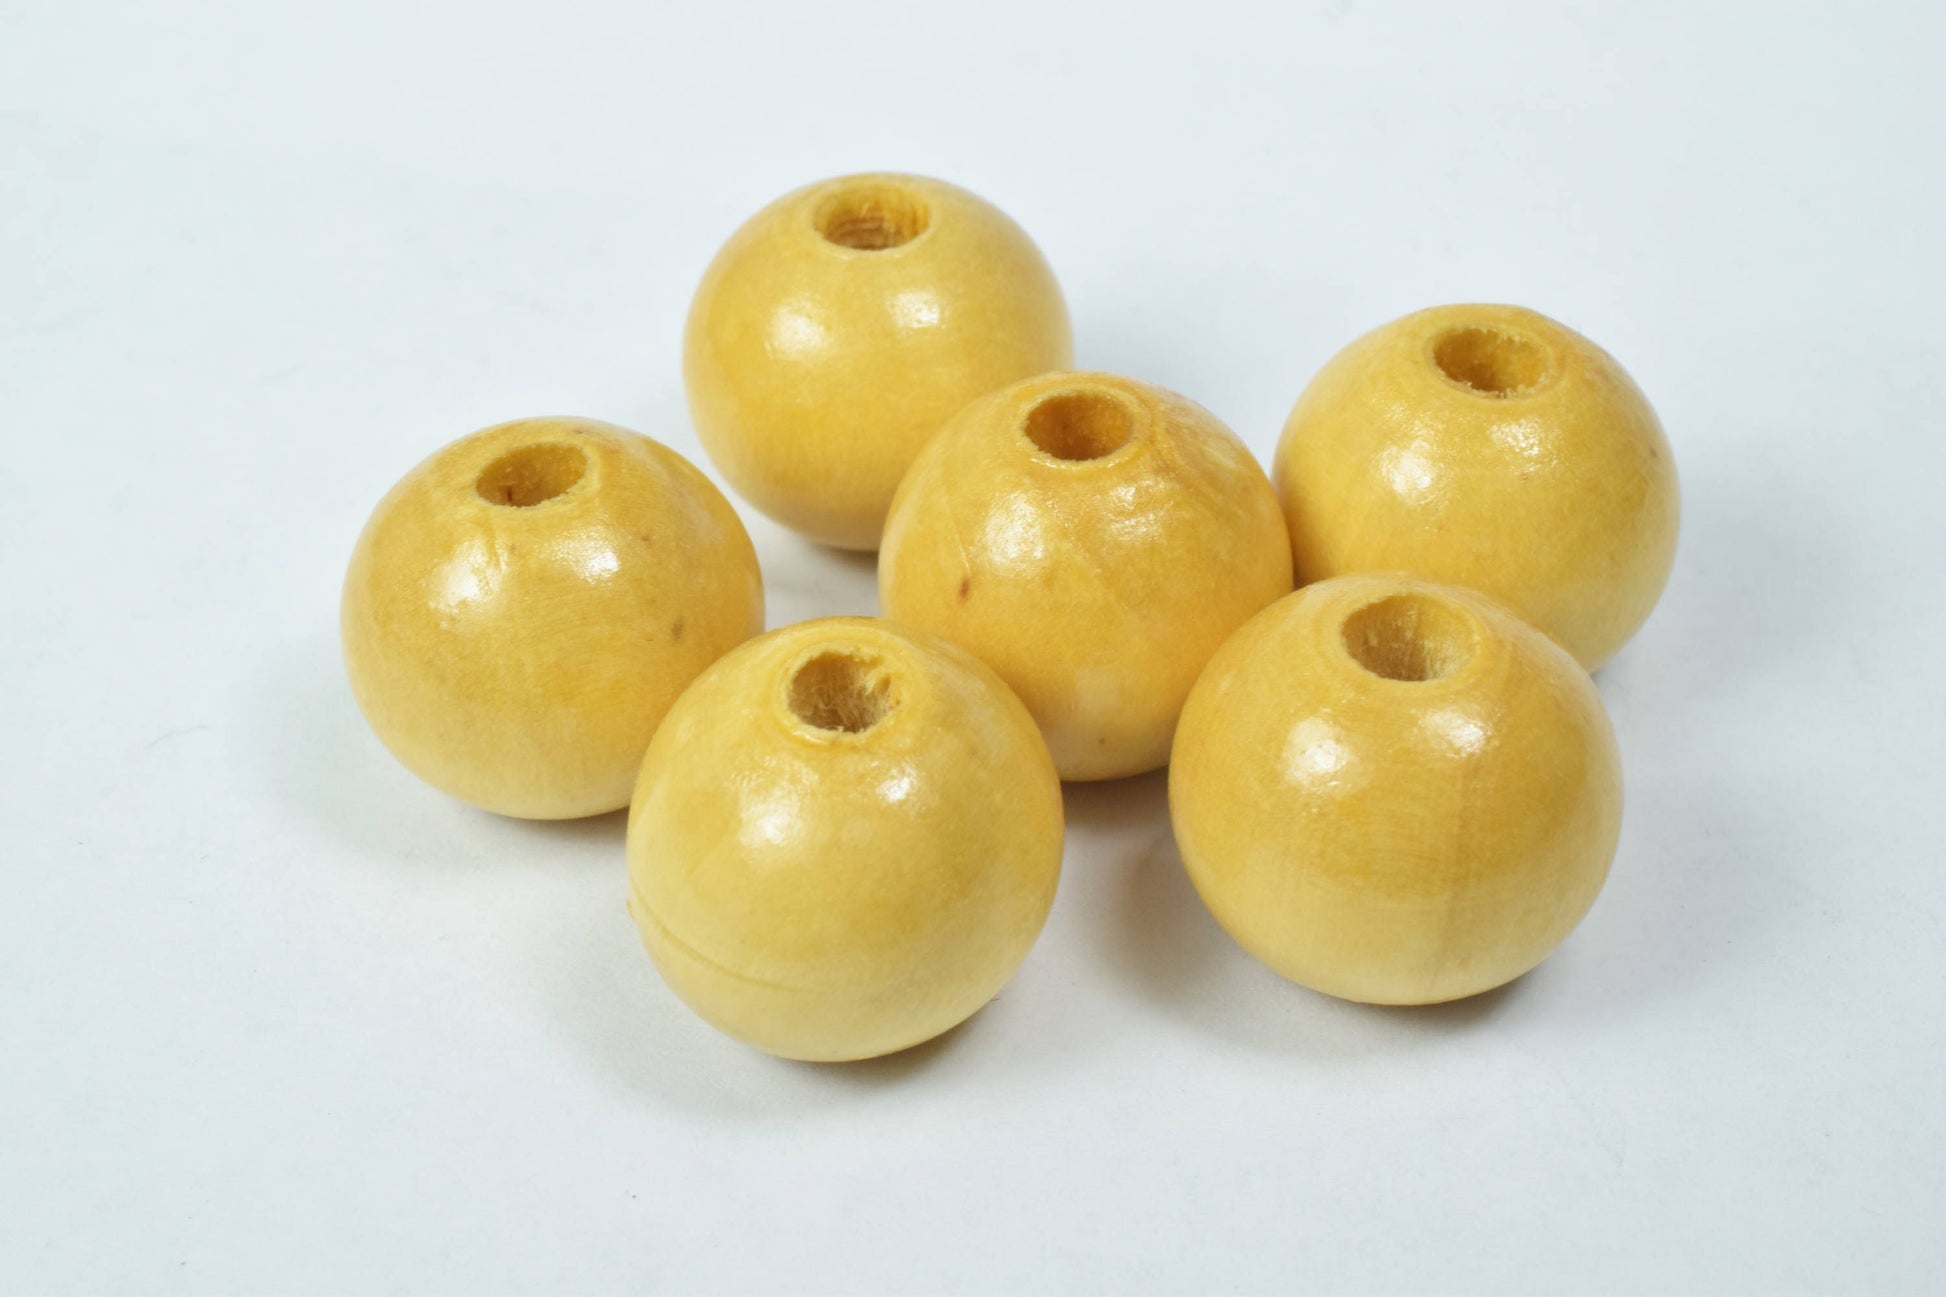 20mm Round Large Hole Wooden Beads, Wooden Beading Tools/Large Hole Wood Beads, Macrame Beads, Round Wooden Beads, DIY,4mm hole size